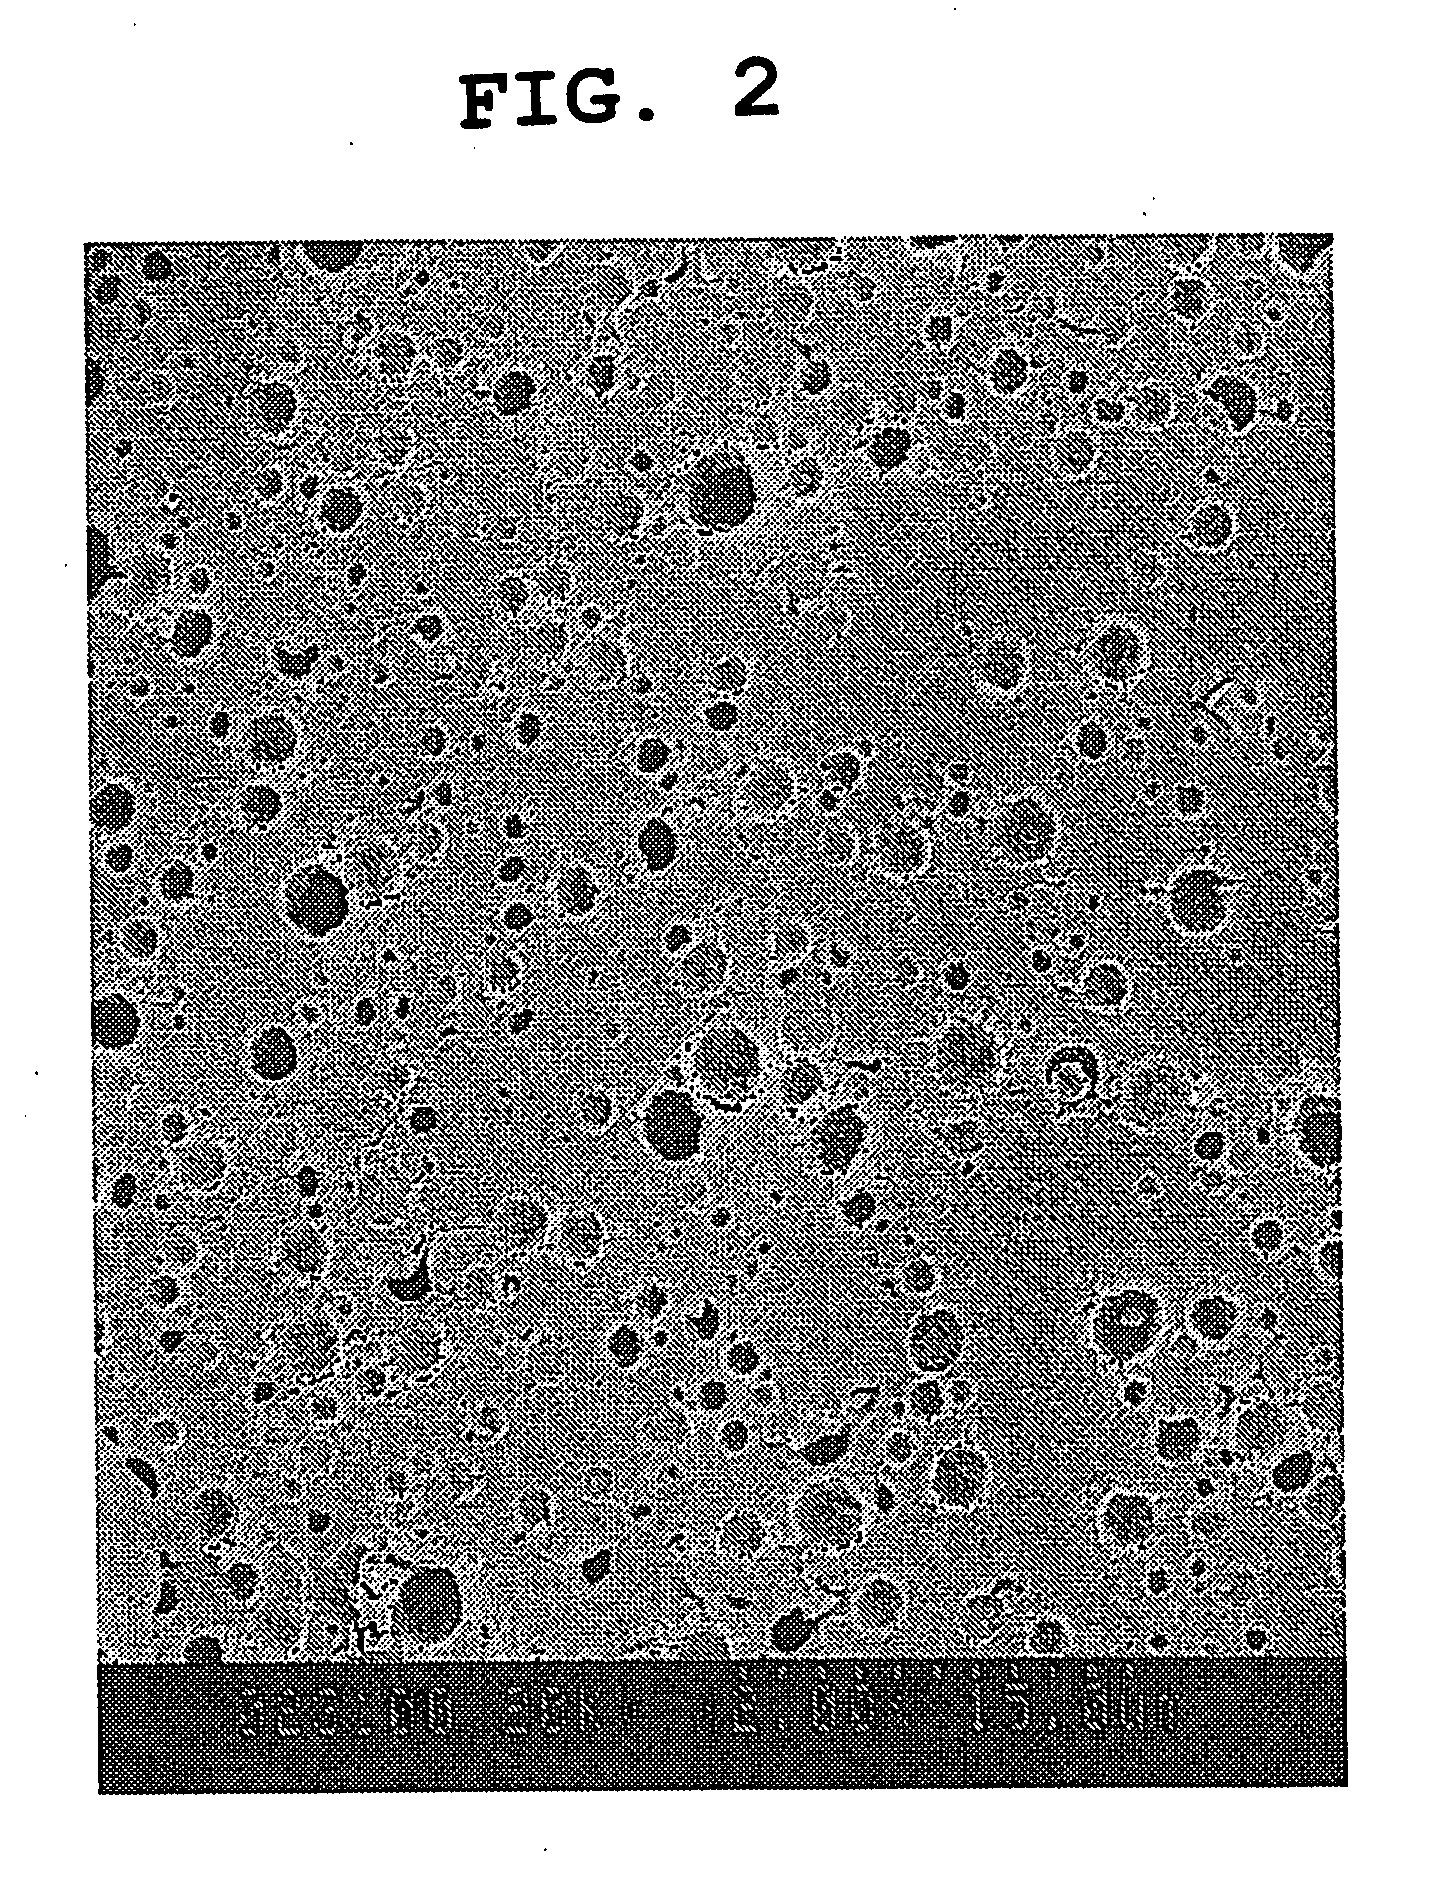 Composition containing reduced coenzyme Q10 and production method thereof